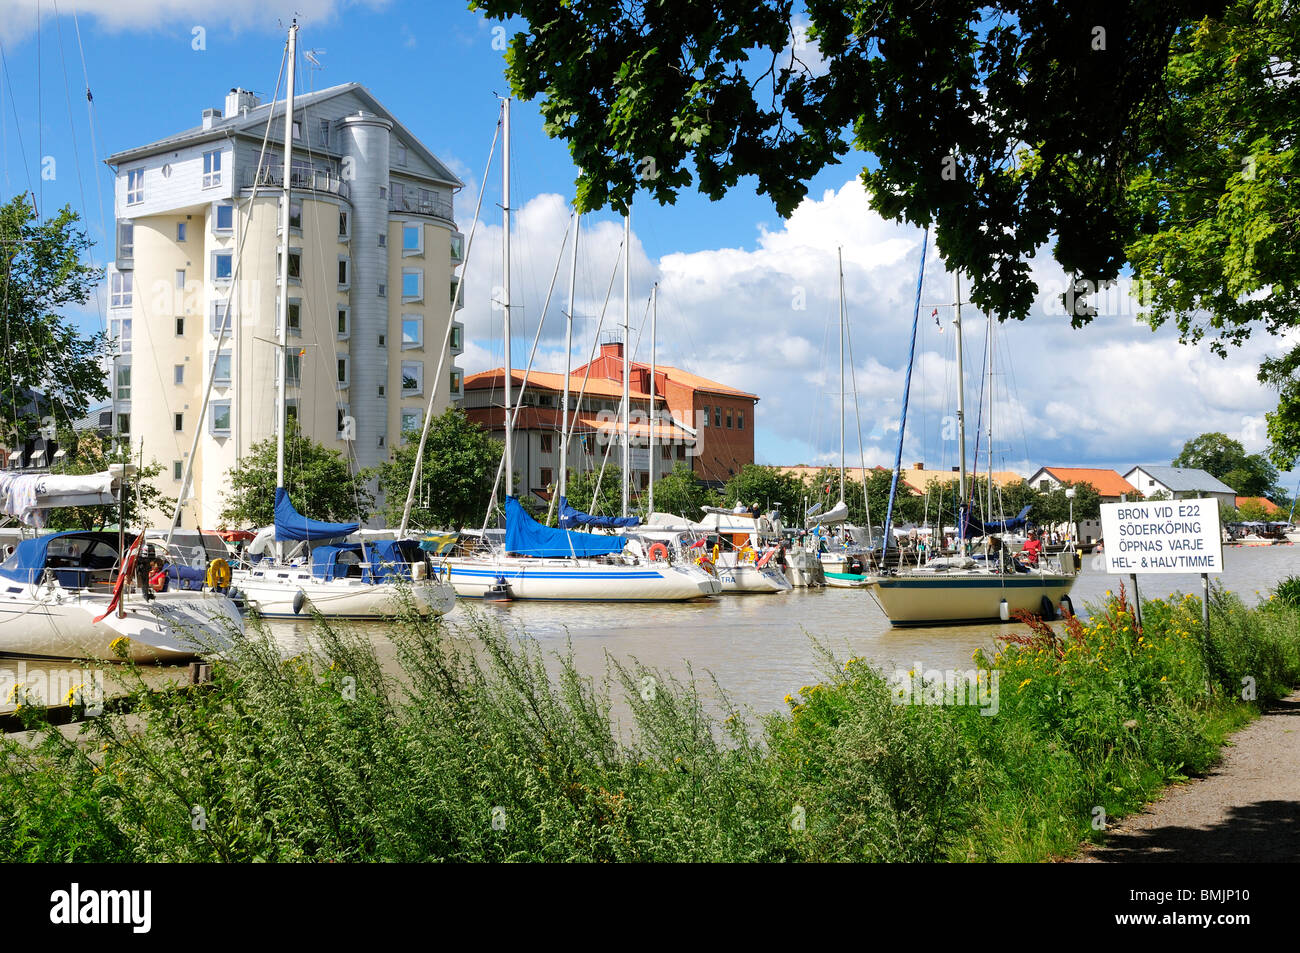 Scandinavian Peninsula, Sweden, Ostergotland, Gota, View of boats moored in canal Stock Photo